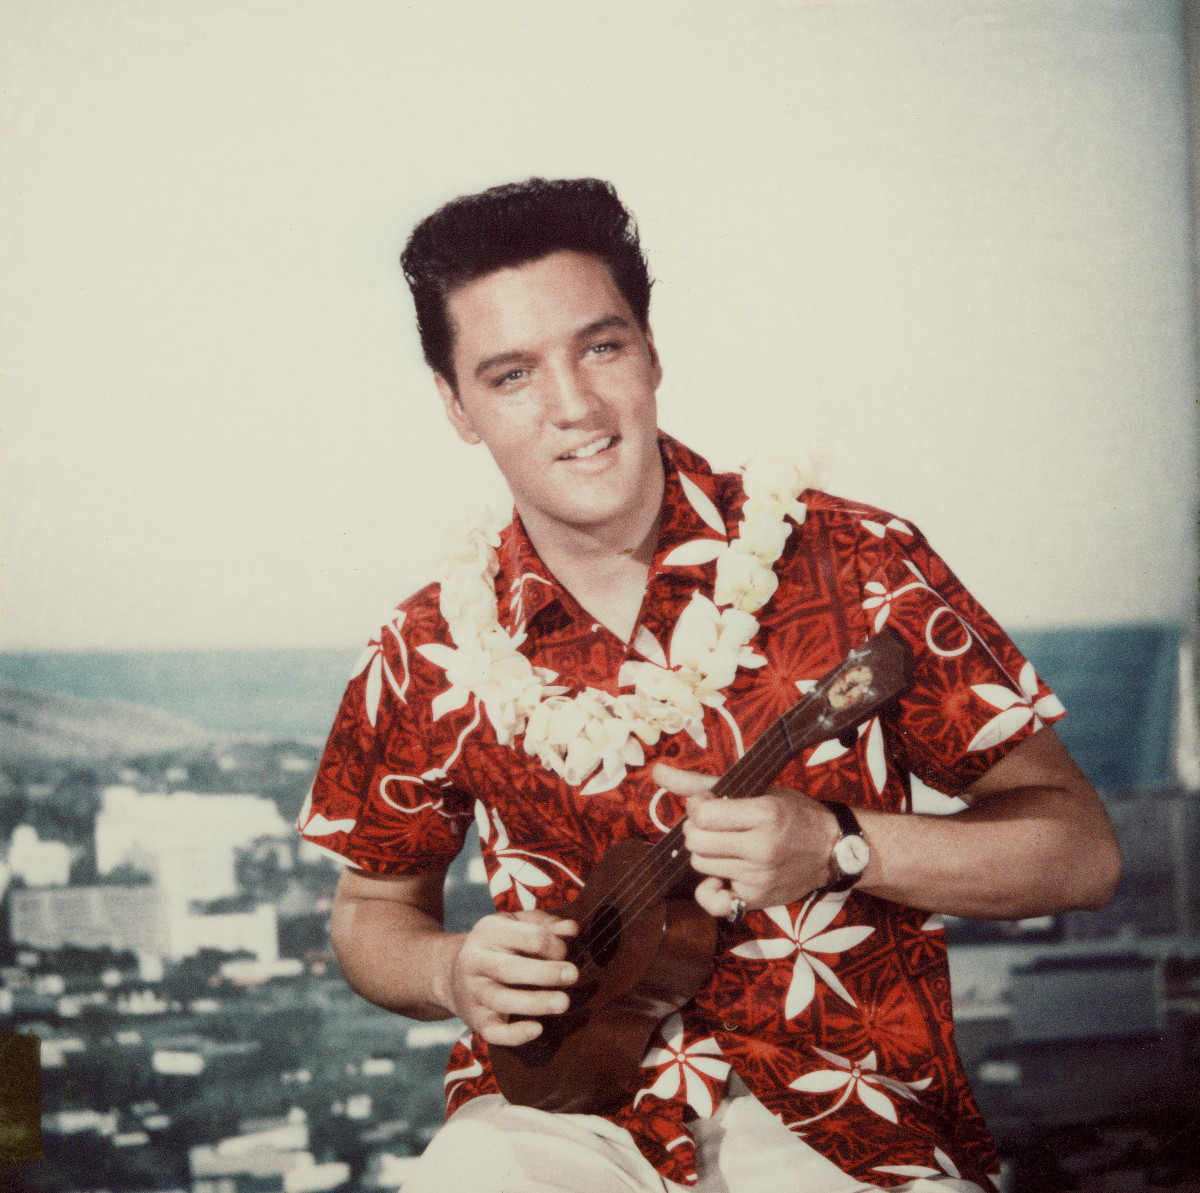 But you can’t very well make a movie called "Blue Hawaii" and not don a Hawaiian shirt. As shown here in a still from the 1961 movie, Elvis rocked those, too.